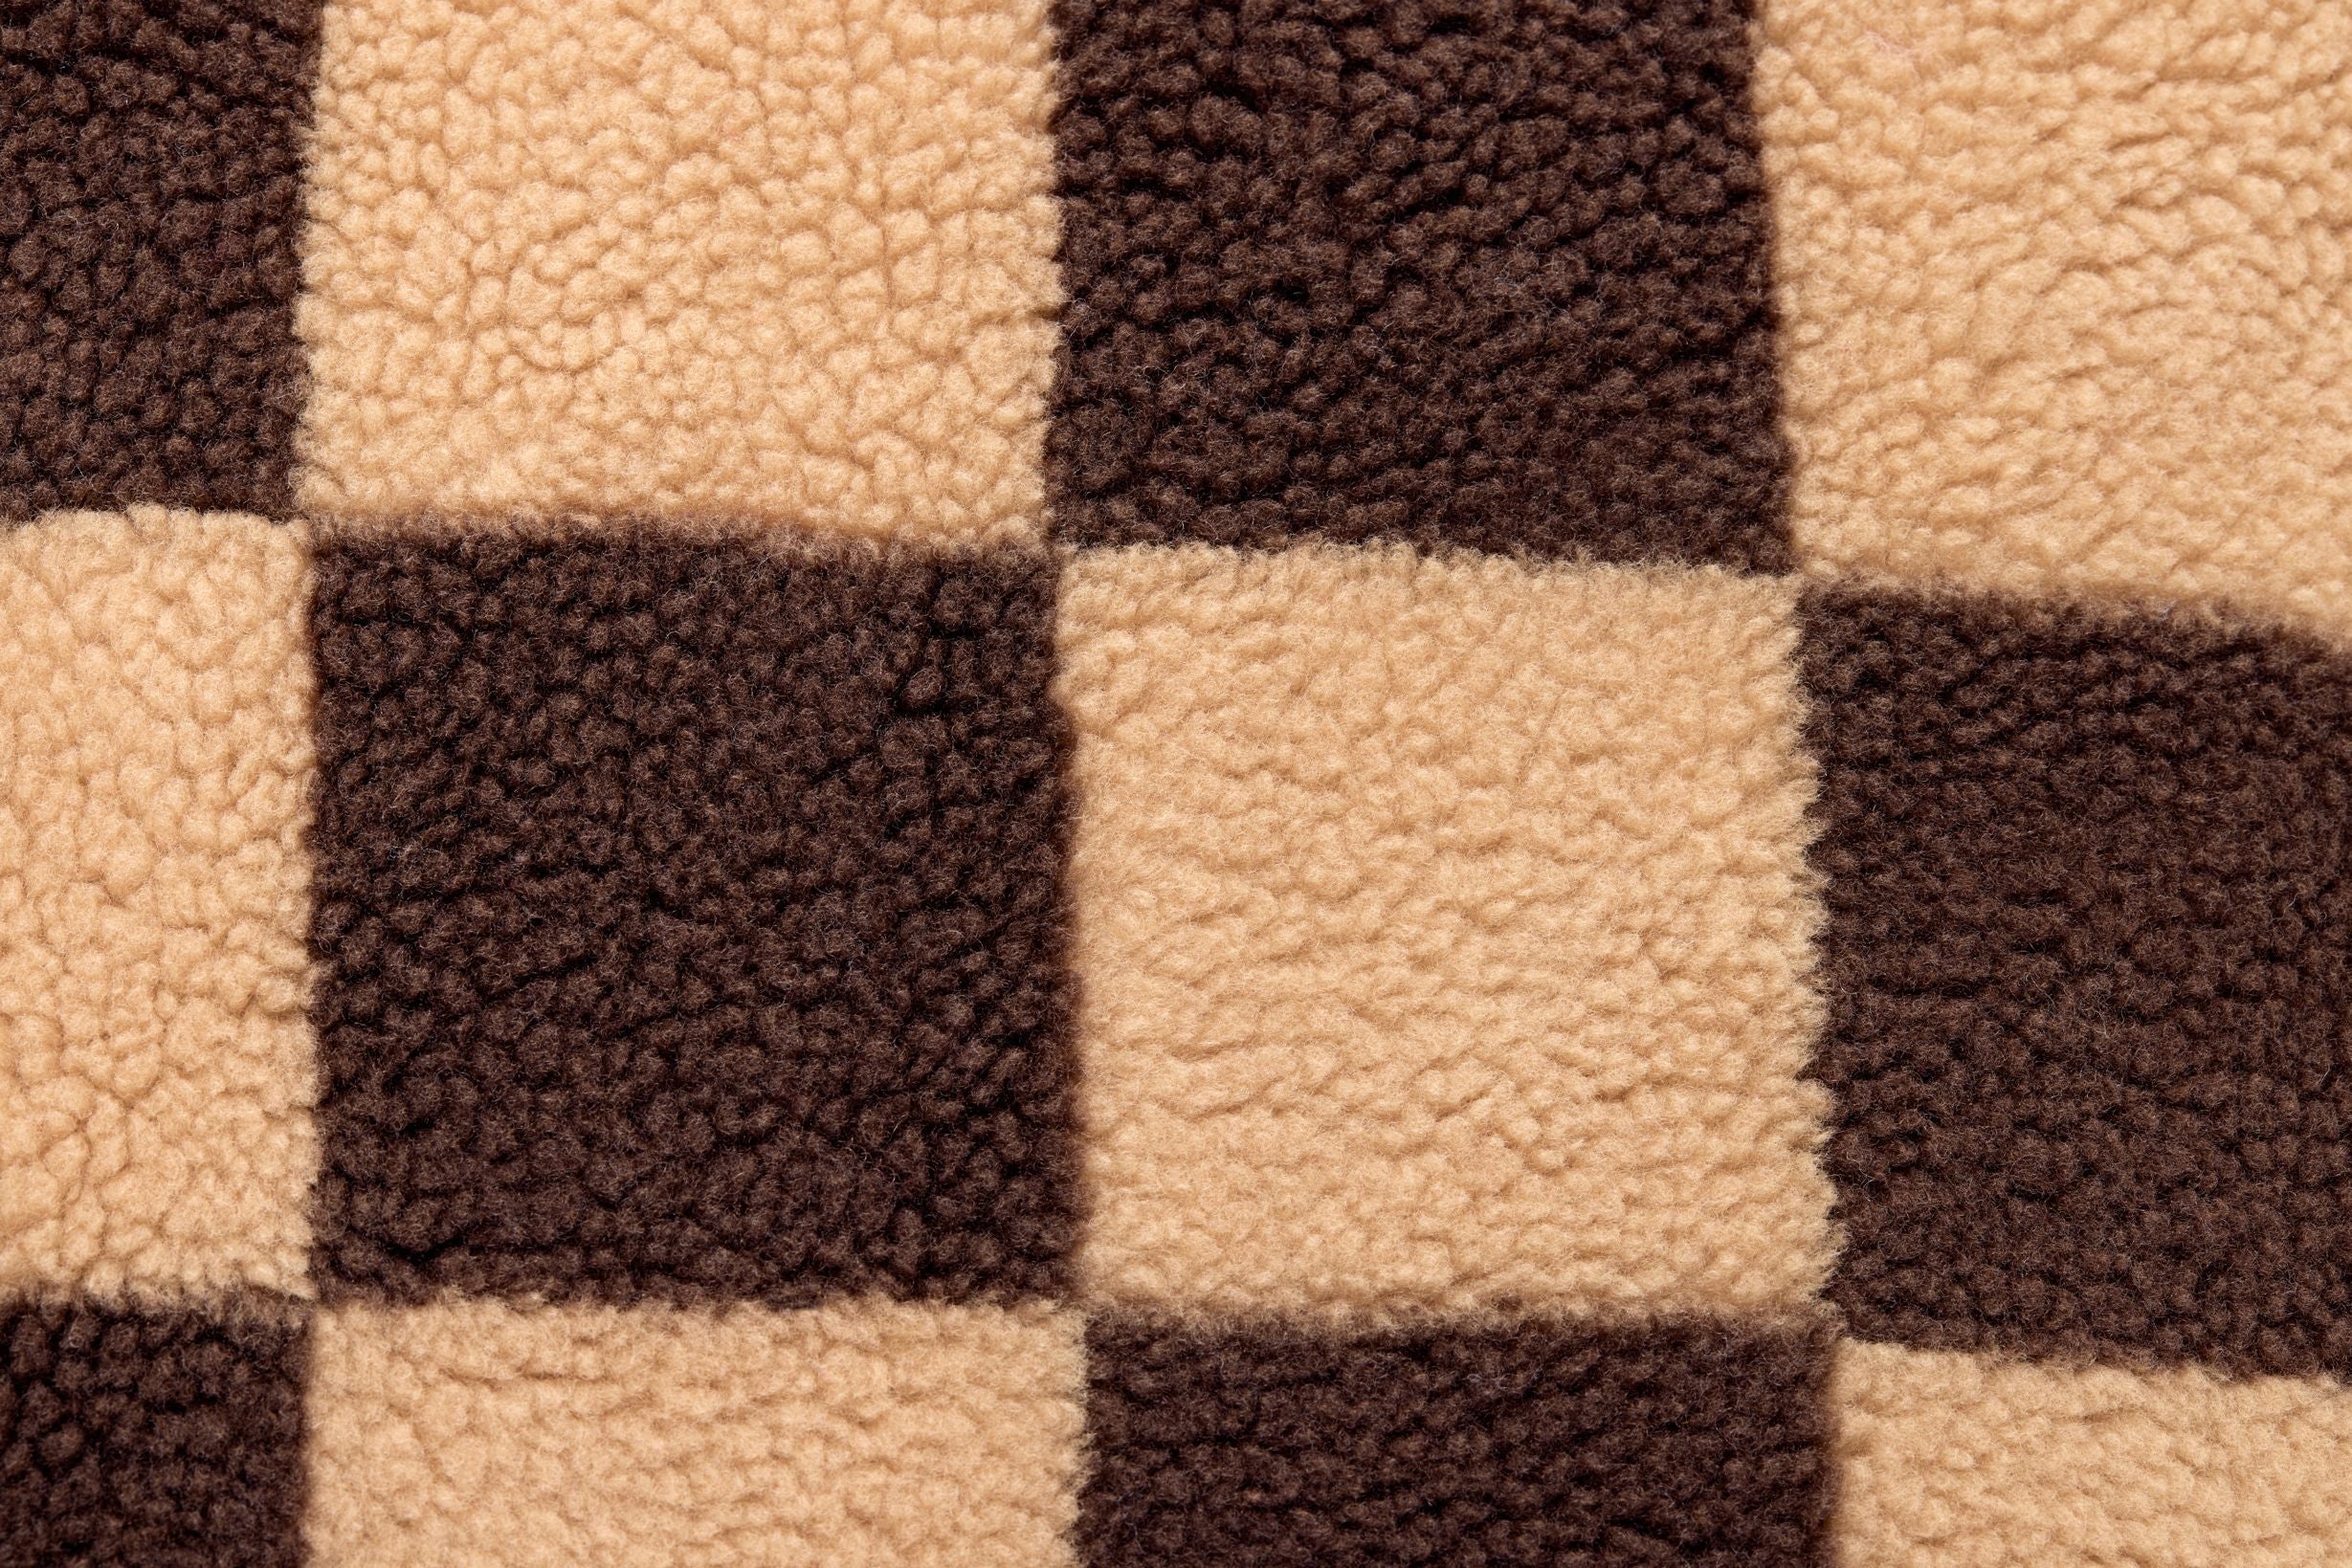 Fatboy Square Pillow Teddy Chess, Brown